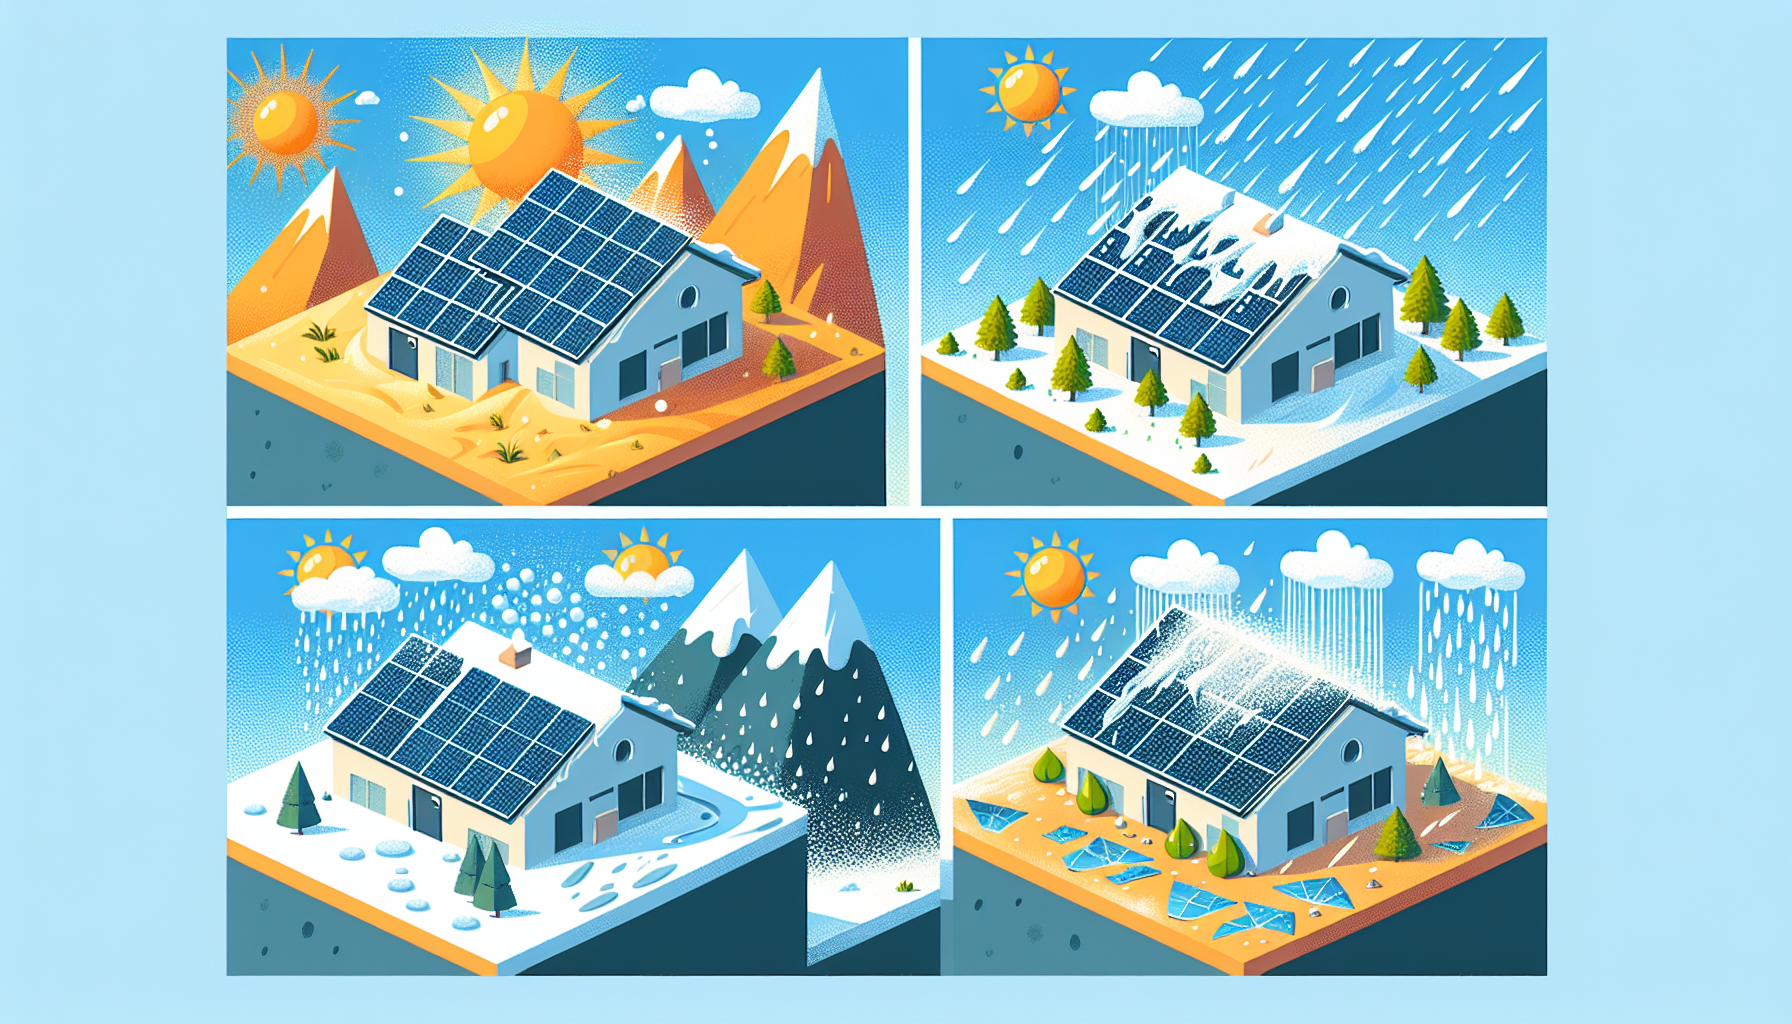 Solar panels on a roof under different climate zones